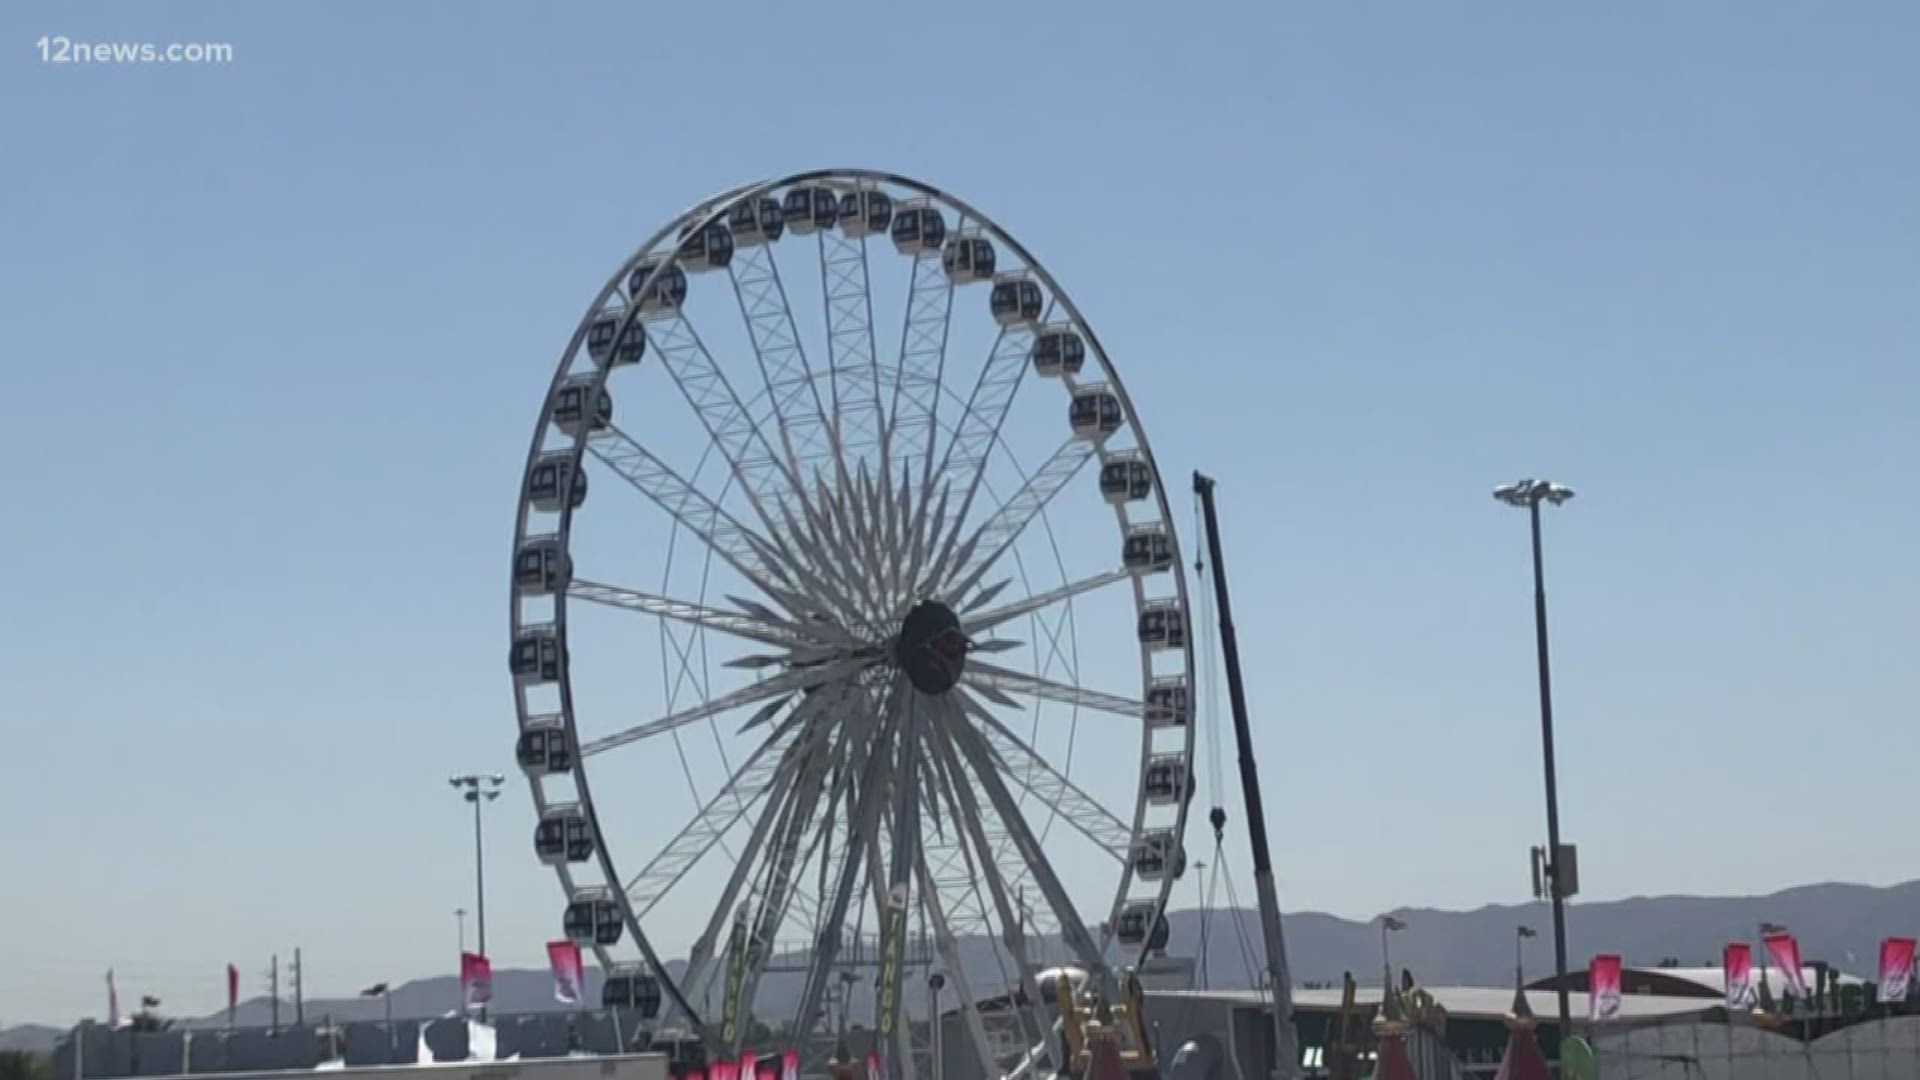 Whether you're there for the petting zoo, free concerts or the corndogs, there's something for everyone at the Arizona State Fair. Take a look inside!